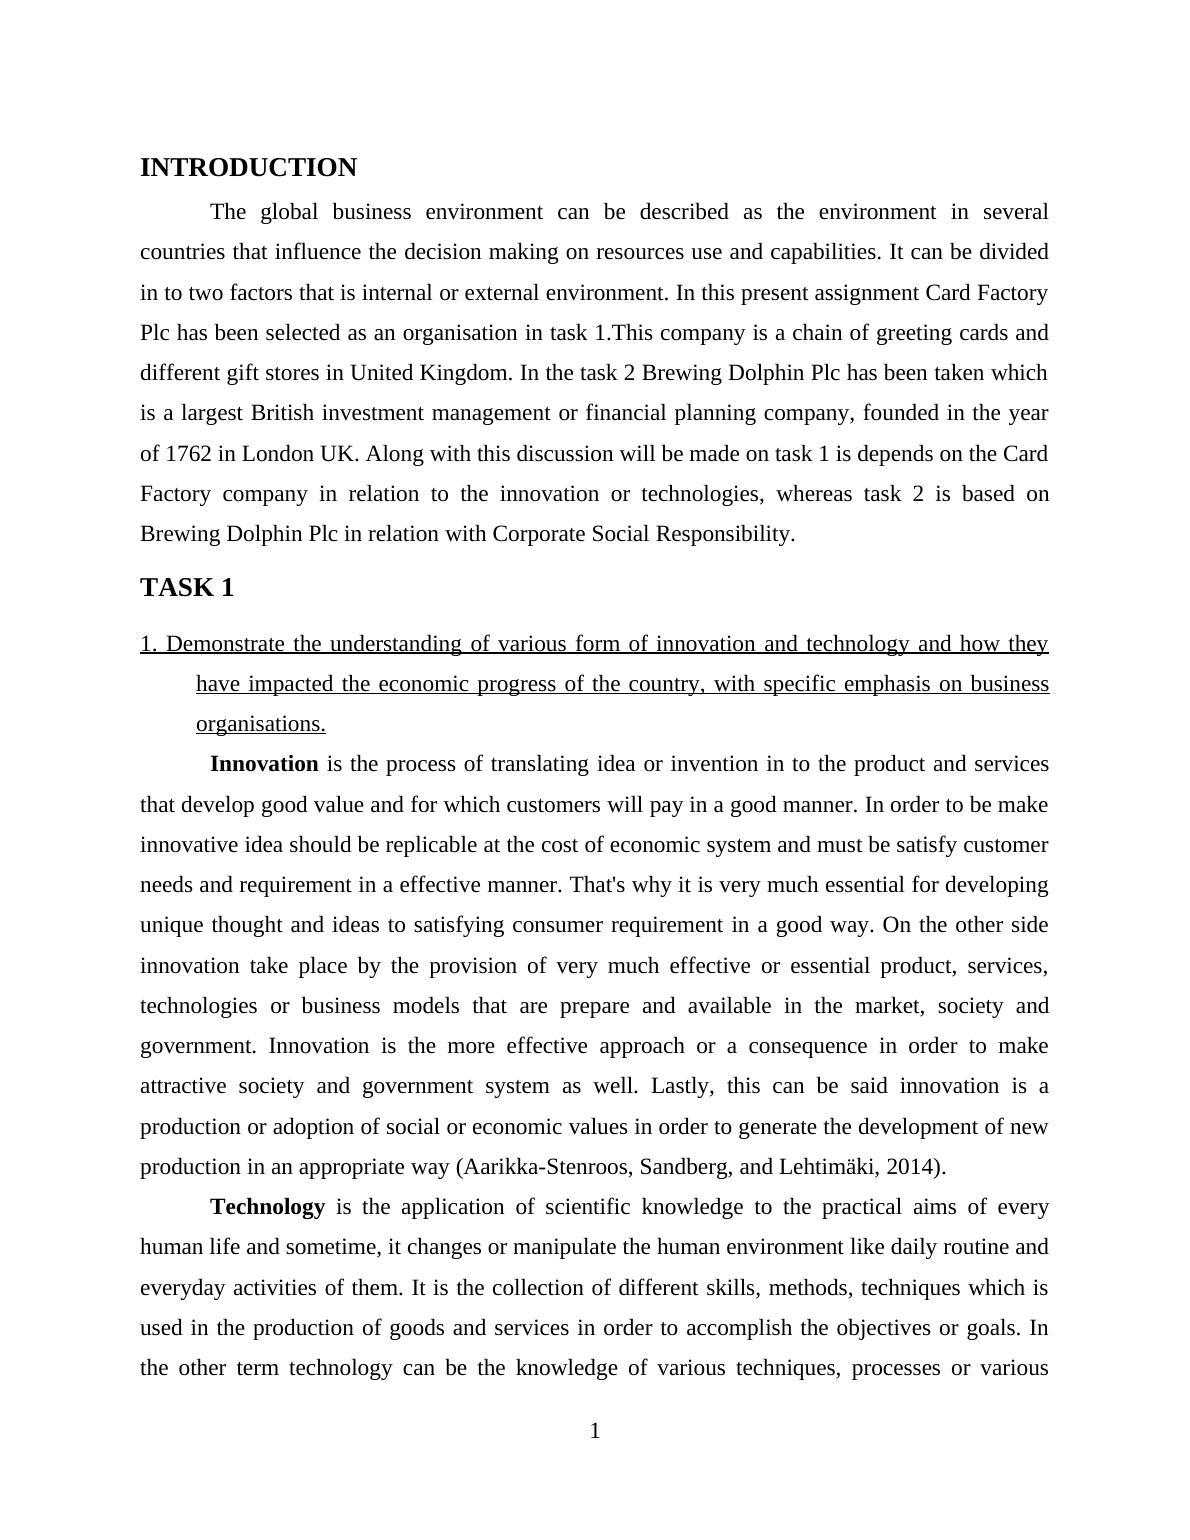 The Global Business Environment InTRODUCTION 1 TASK 11 1. Innovation and Technology in Business Organisations_4